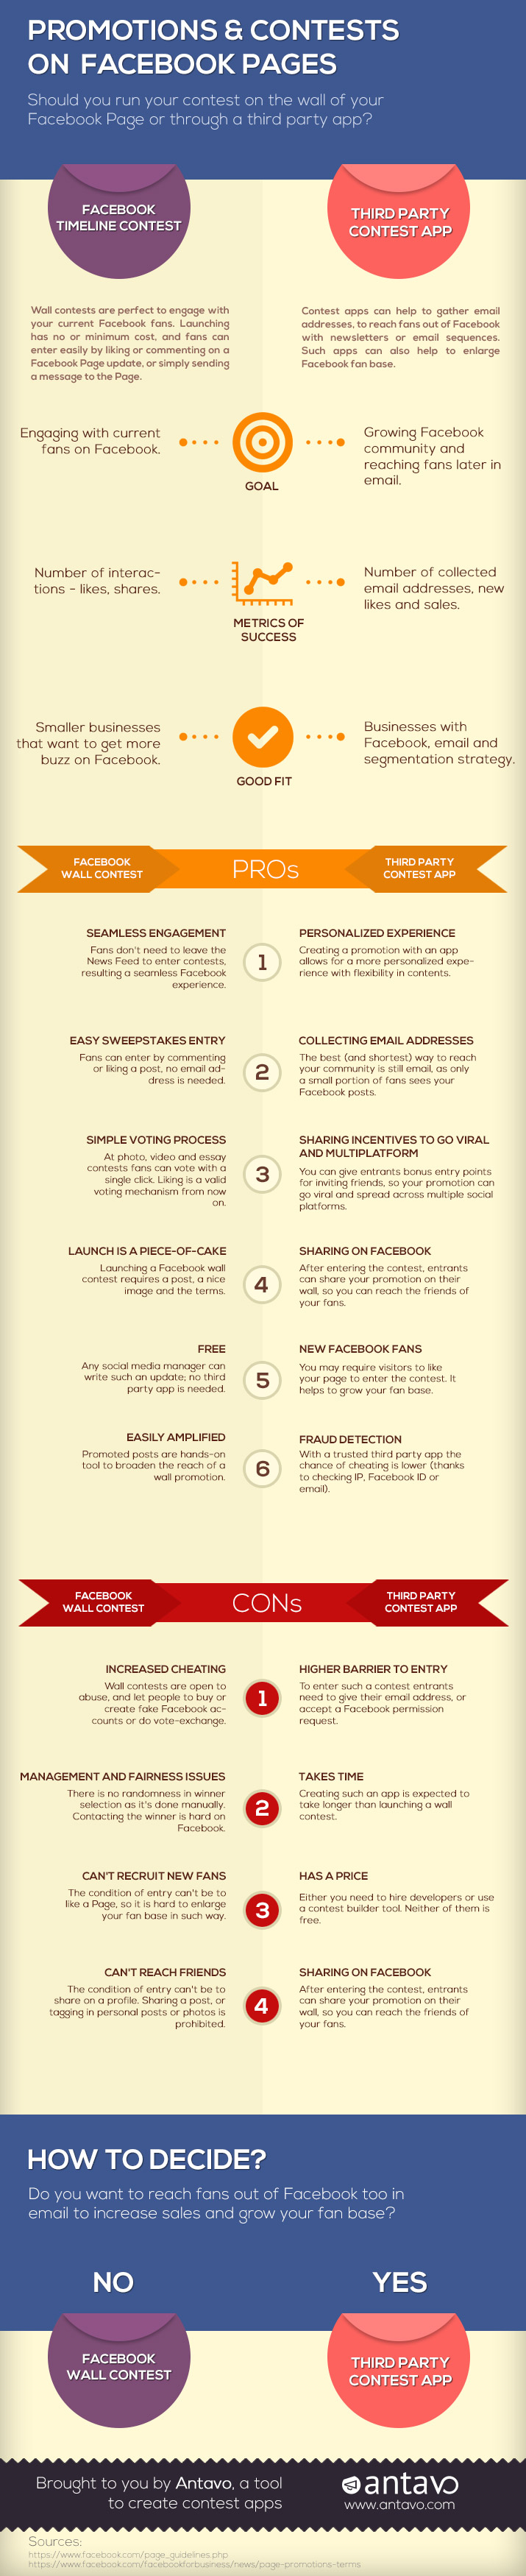 Facebook Promotions and Contests Wall vs App Infographic